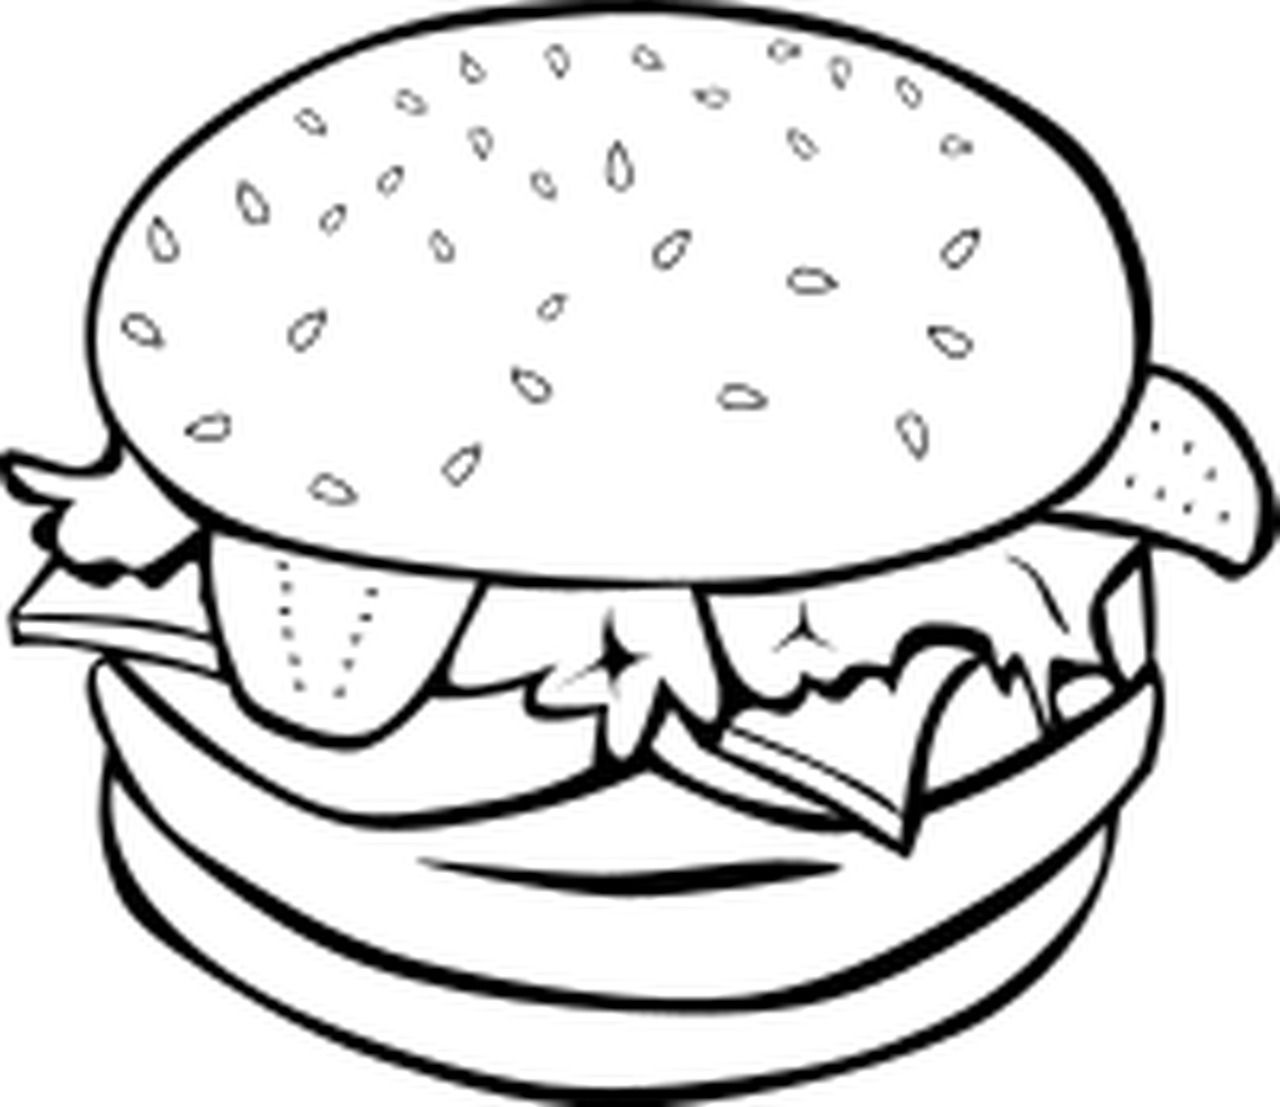 Cheeseburger Coloring Page - Ð¡oloring Pages For All Ages